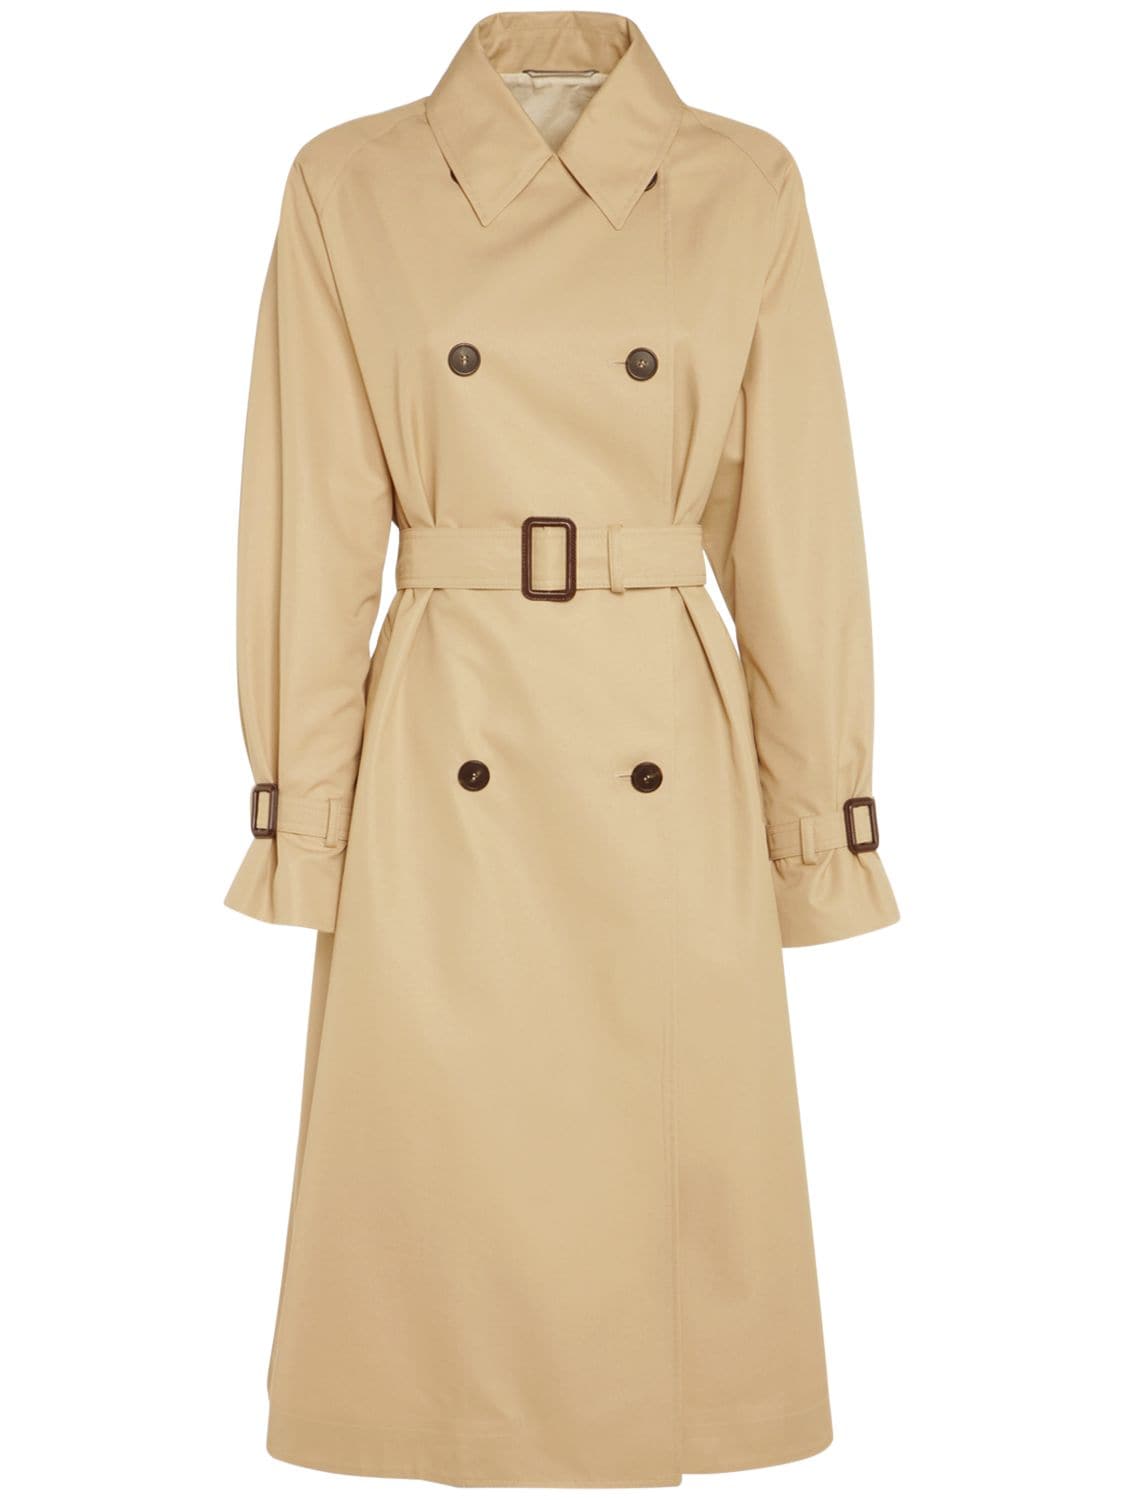 Image of Canasta Cotton Blend Trench Coat